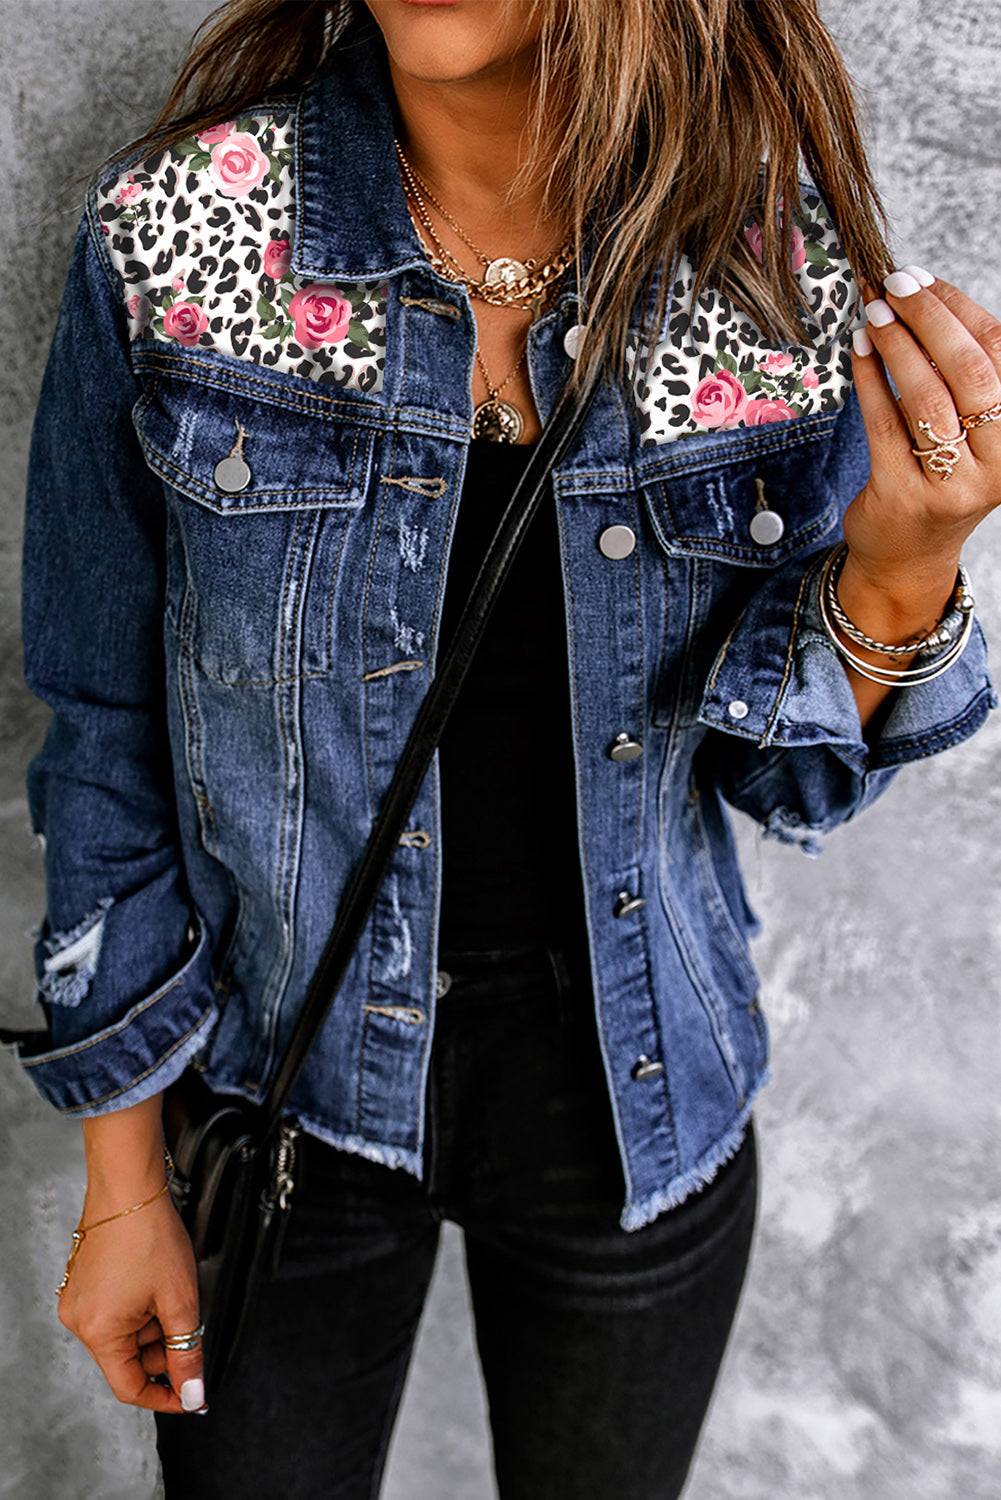 Leopard and Rose Denim Jacket - The Lakeside Boutique